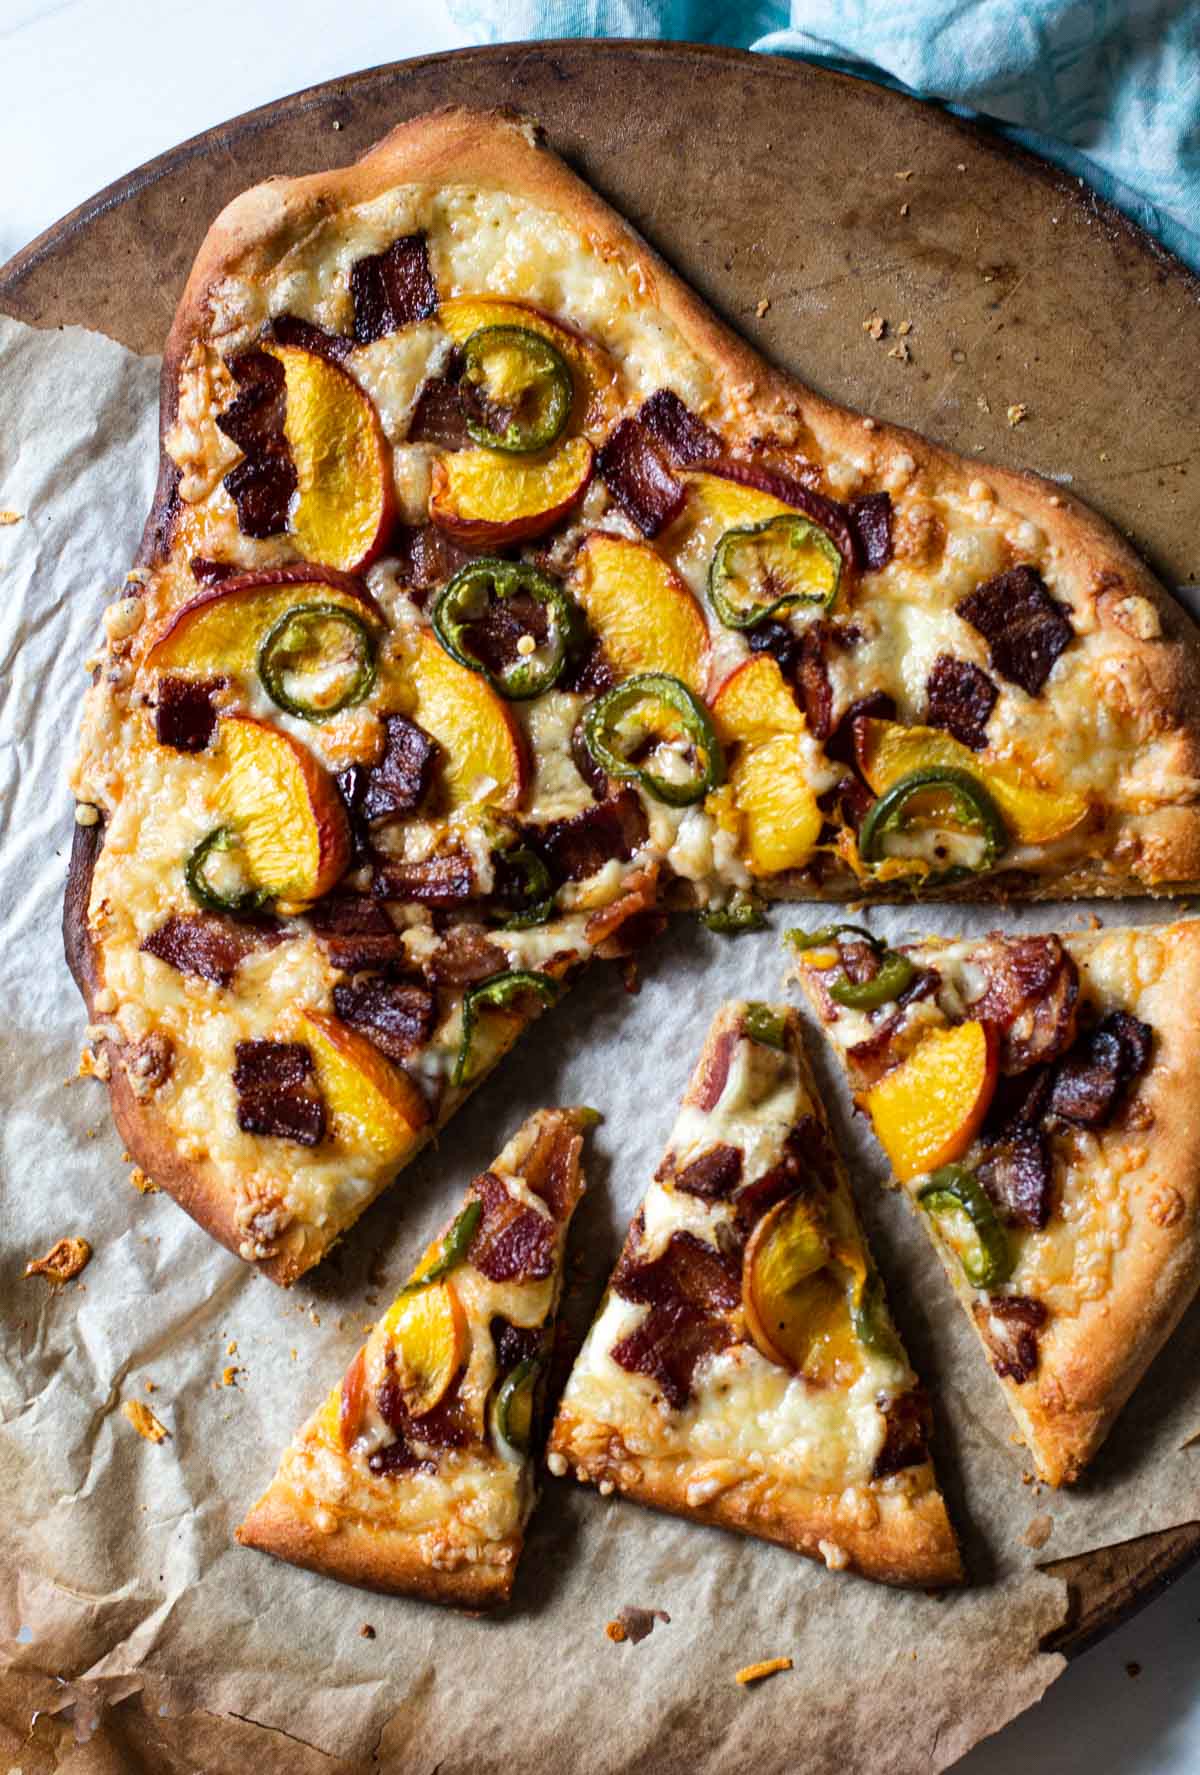 Bacon, jalapeno peach pizza cooked on a pizza stone.